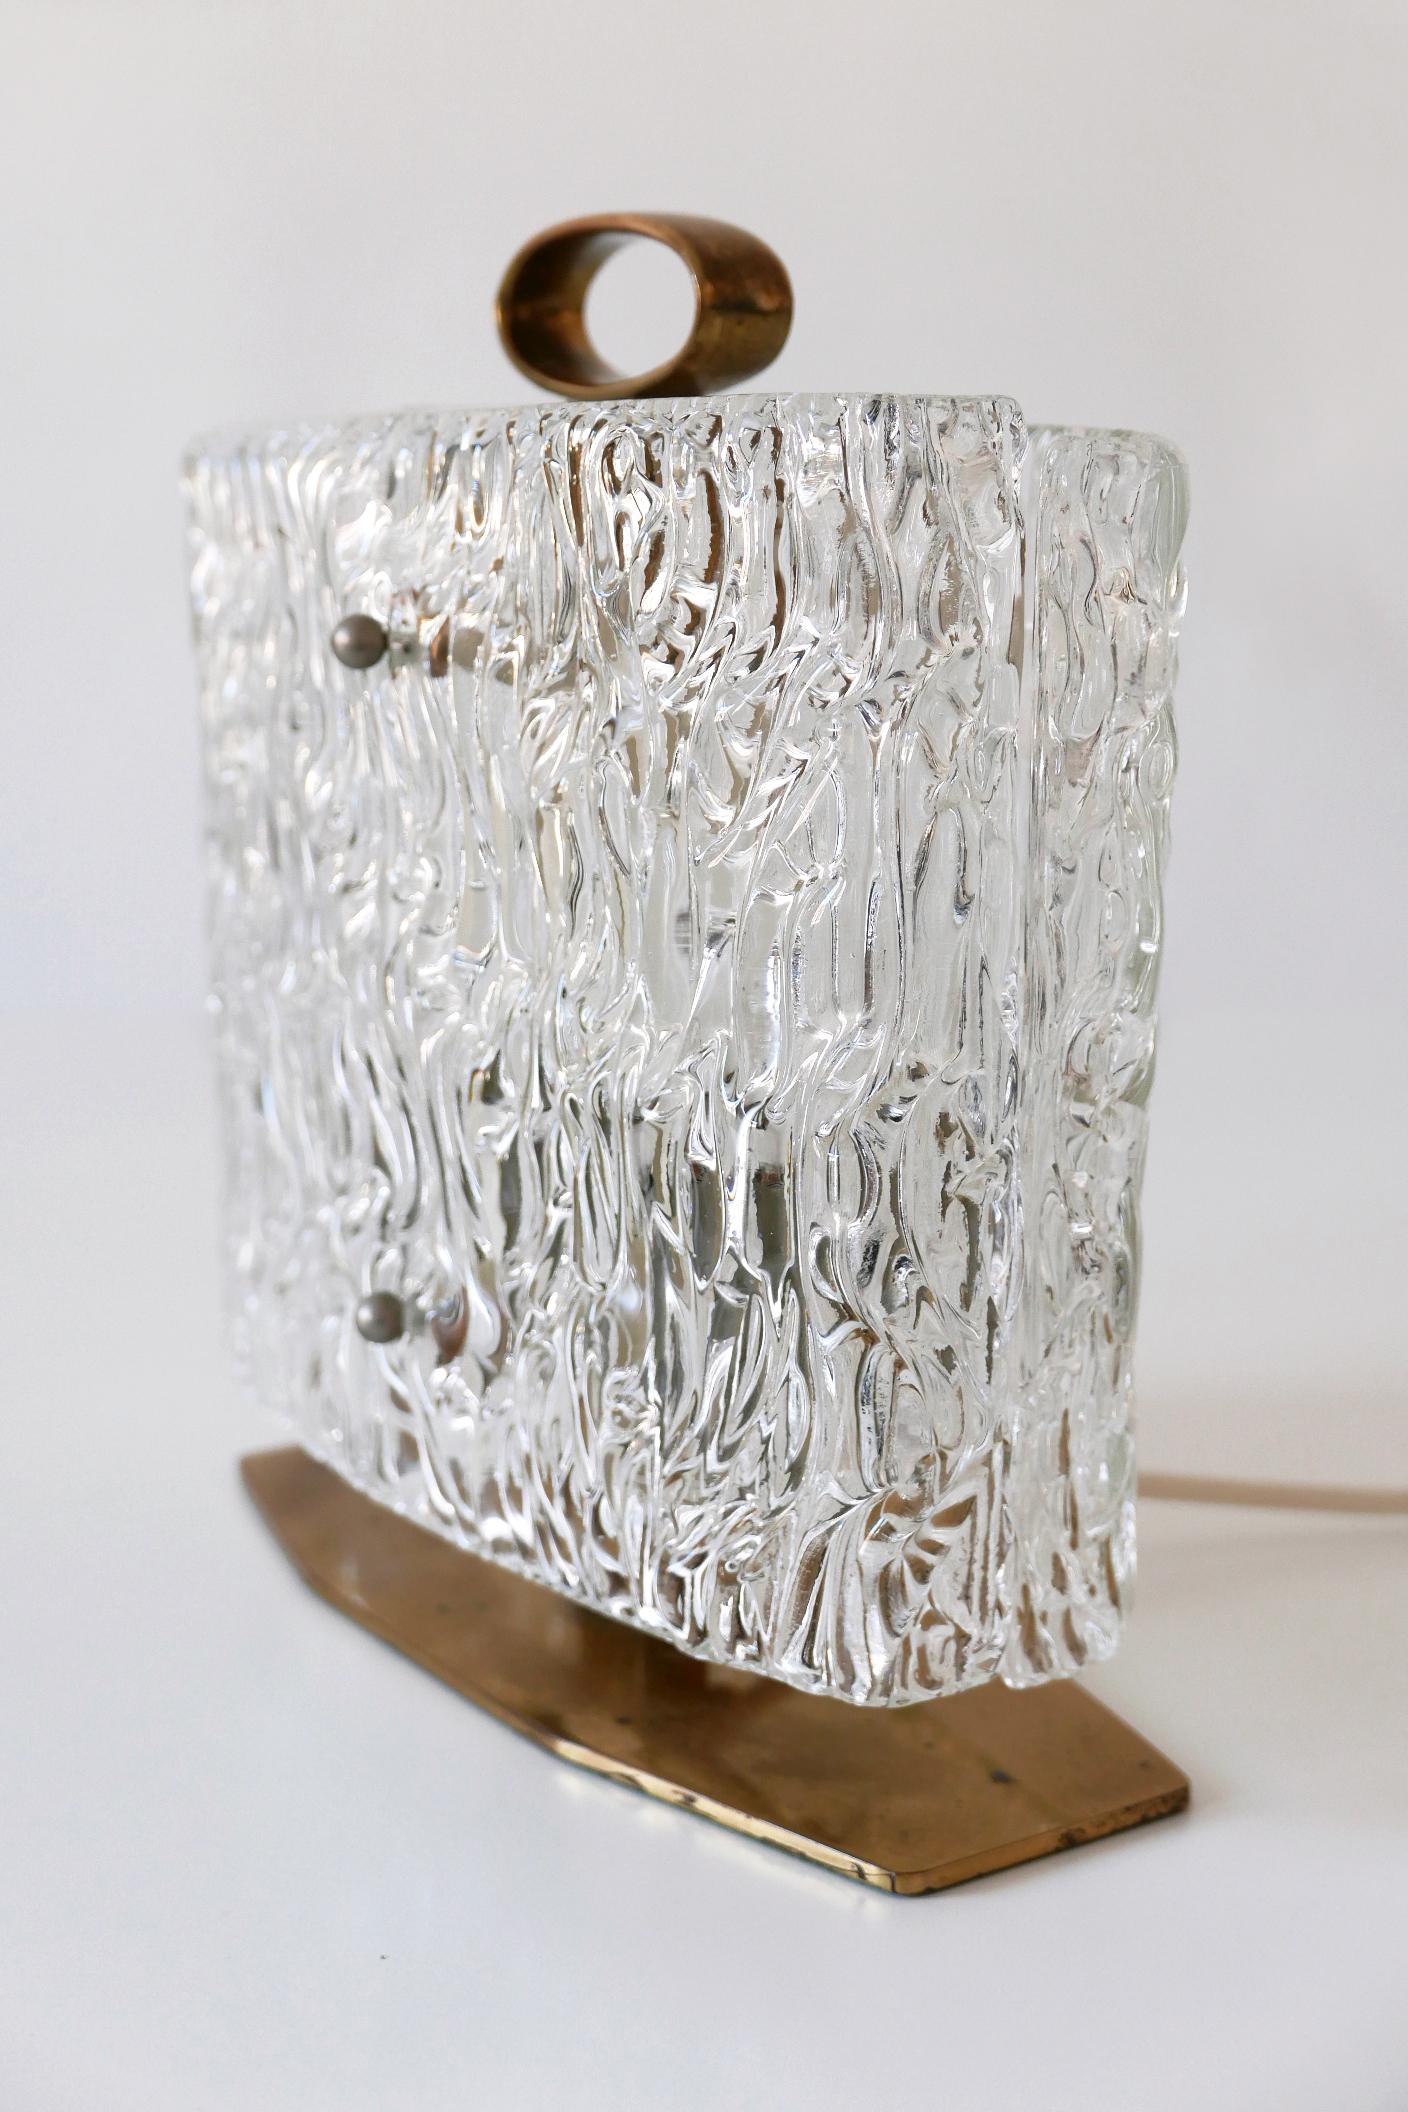 German Exceptional Mid-Century Modern Table Lamp with Ice Glass Shade, 1950s, Italy For Sale